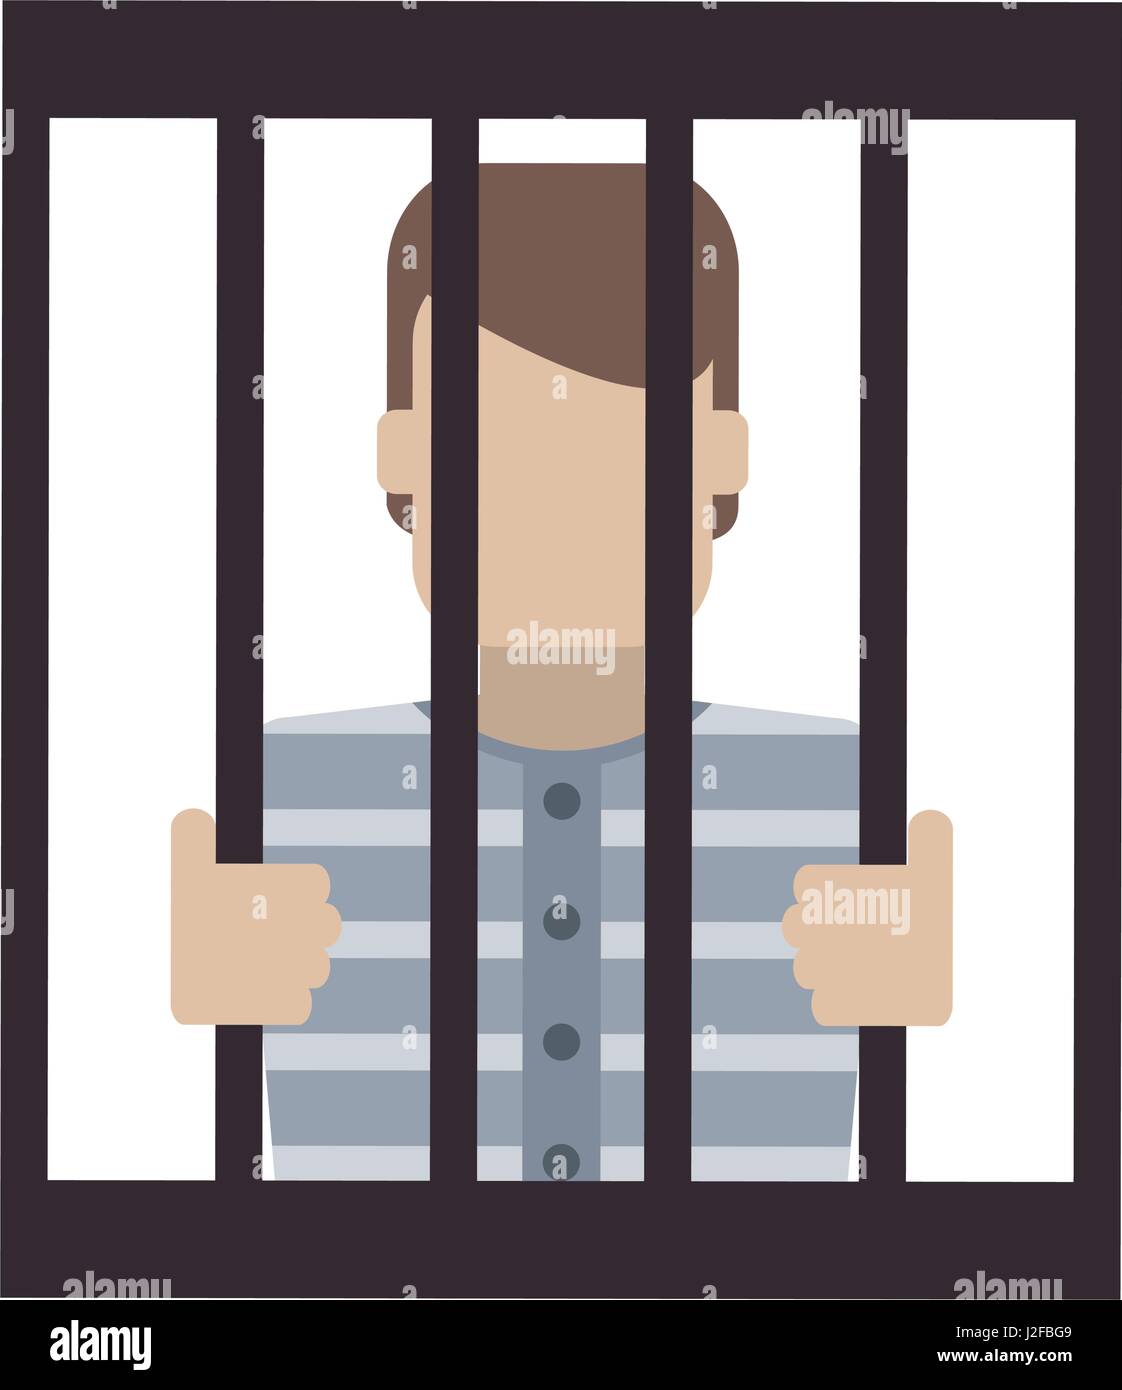 male prisoner behind bars icon image  Stock Vector